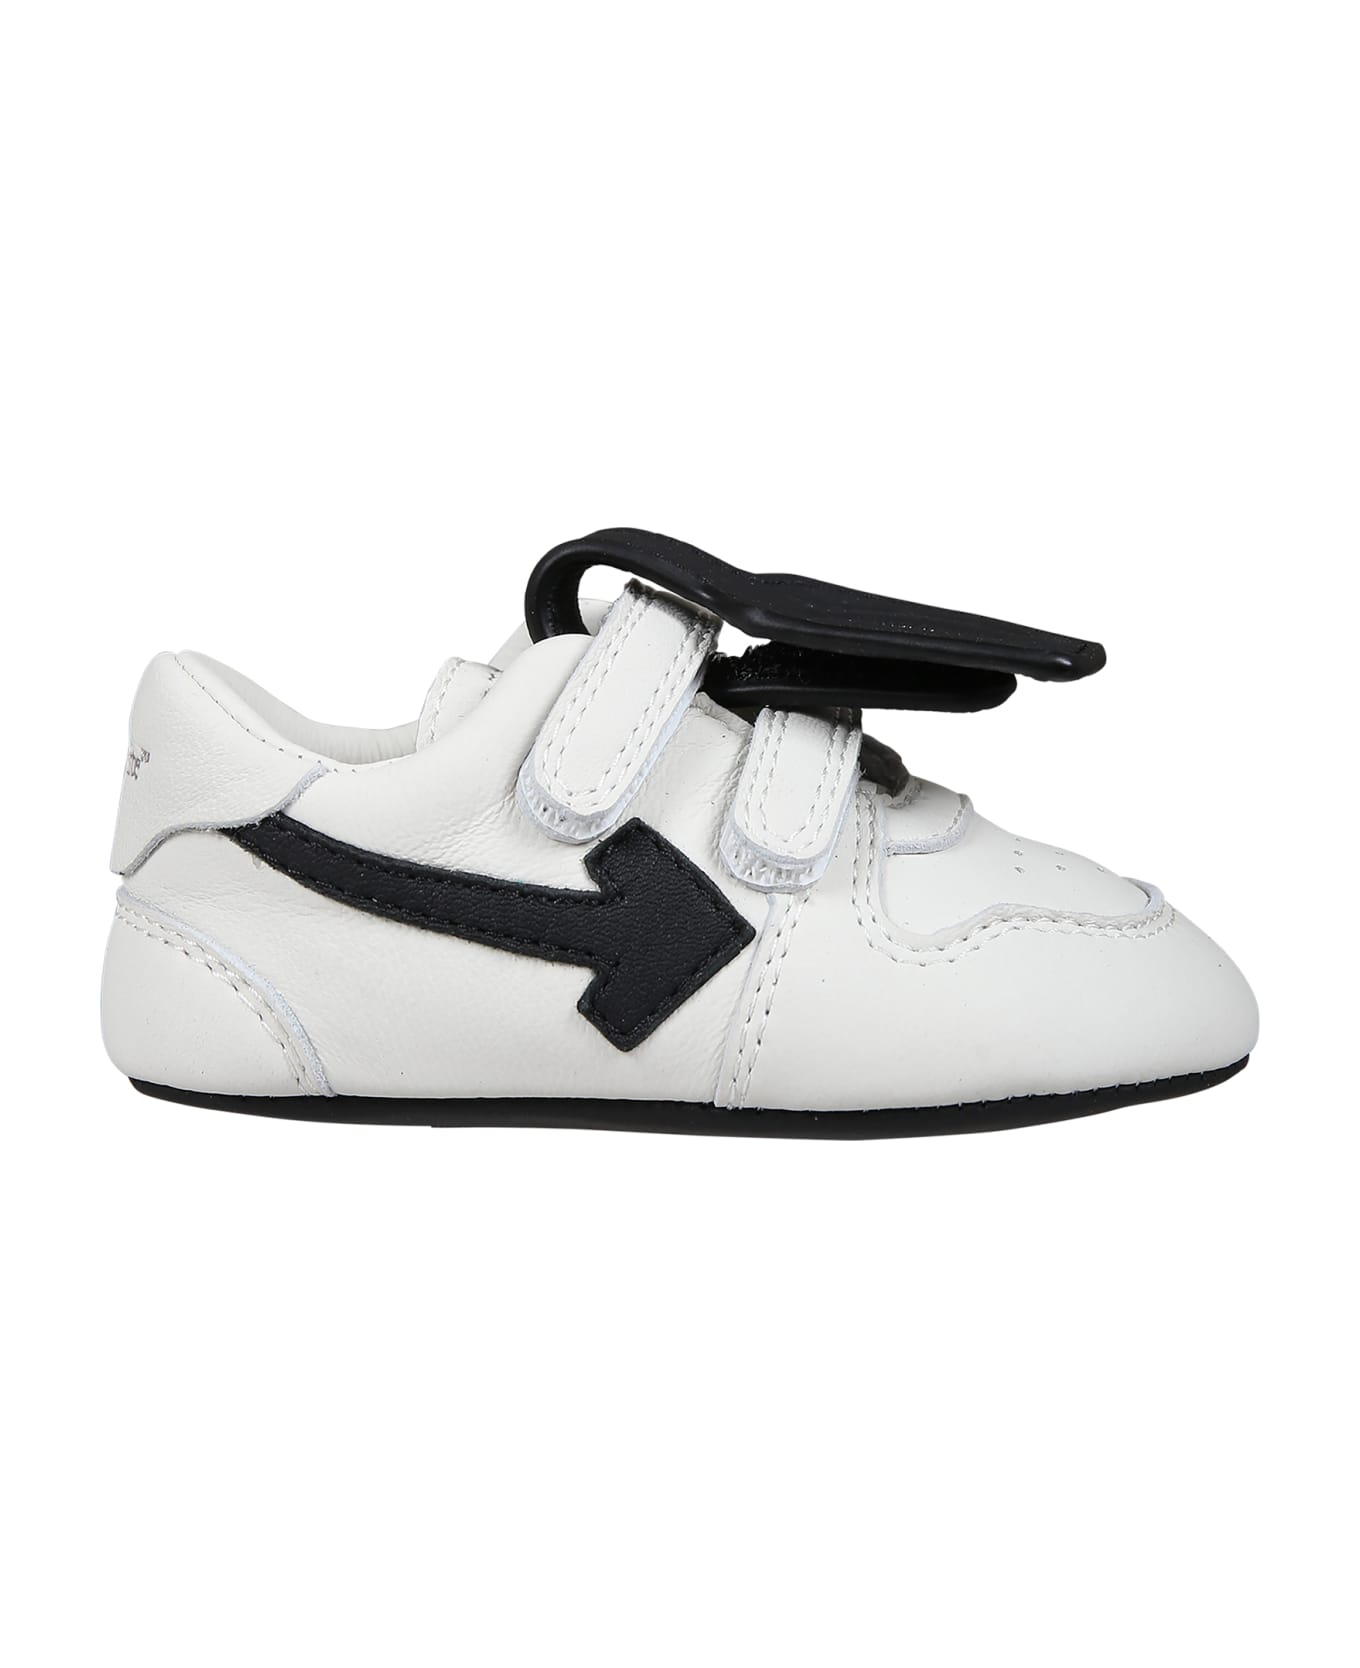 Off-White White Sneakers For Baby Kids With Iconic Arrow - White シューズ